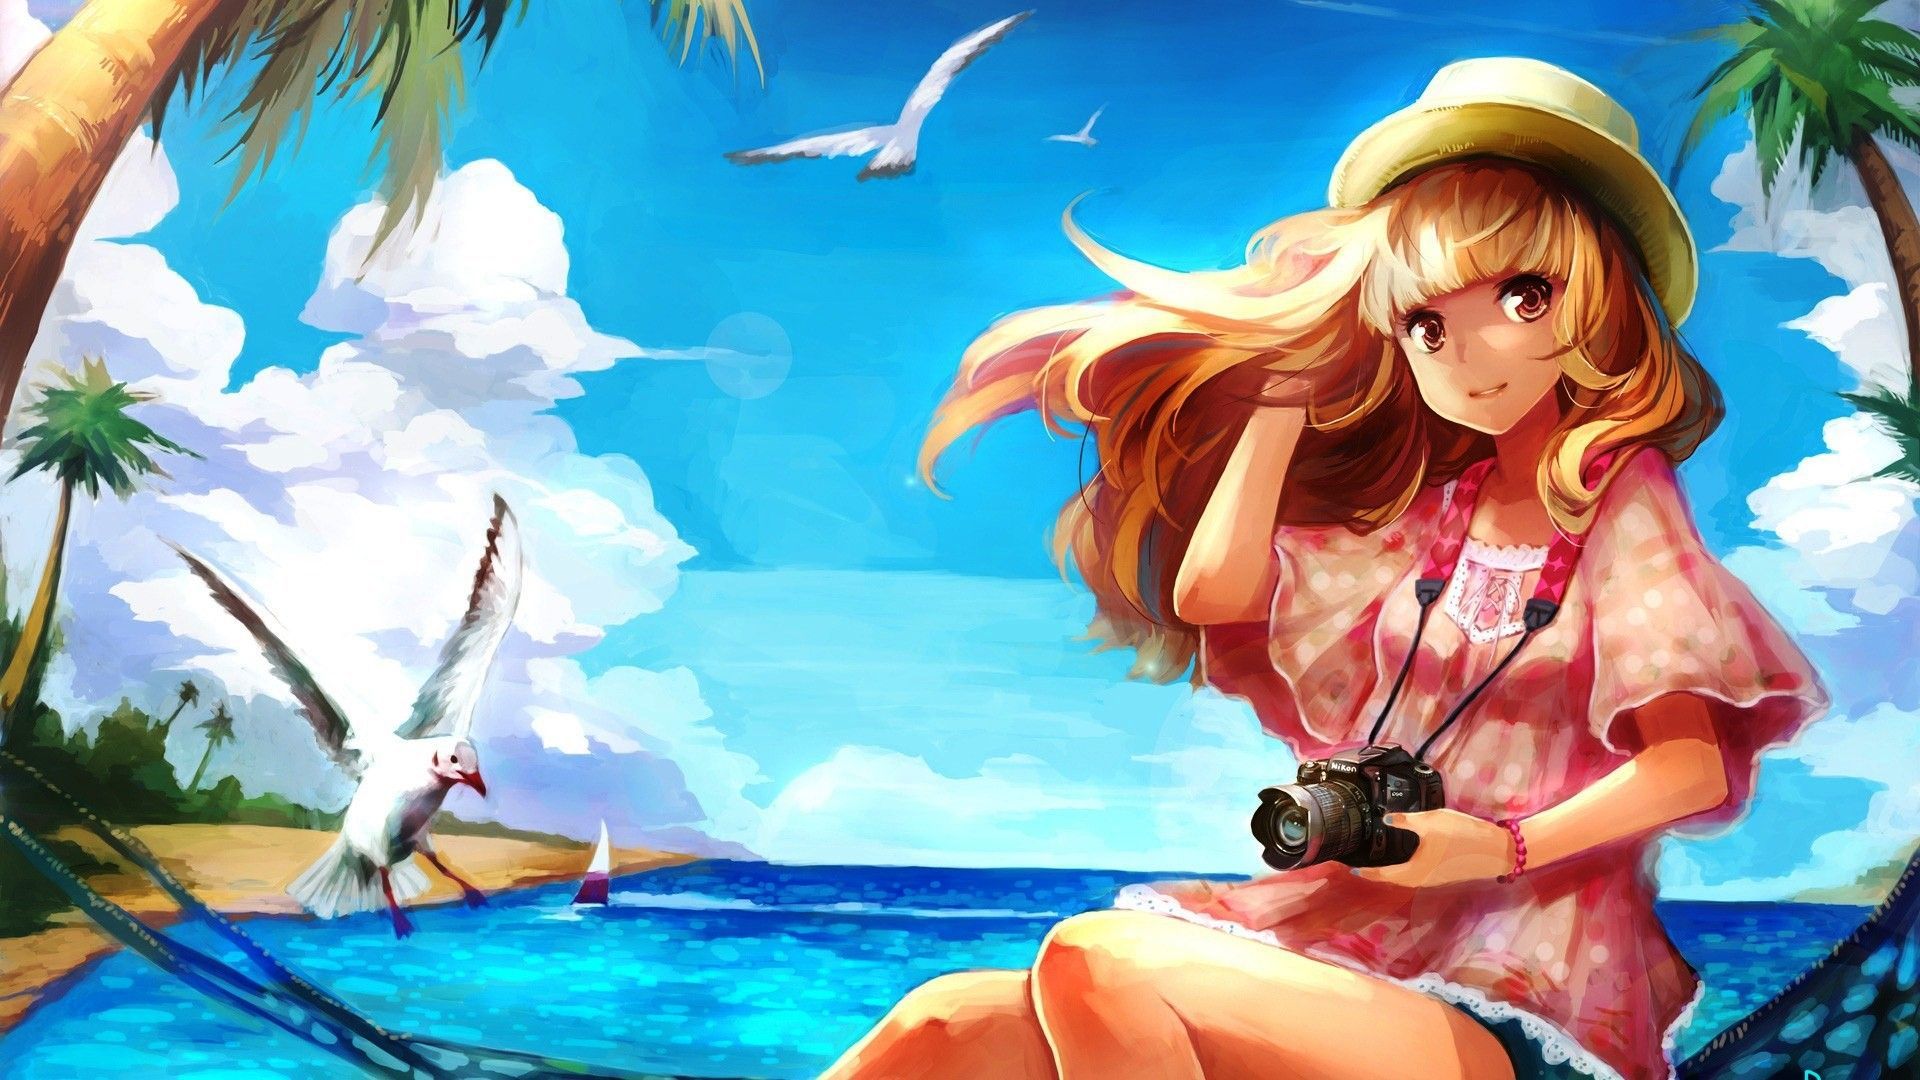 Blonde Anime with Camera HD Wallpaper. Anime summer, Anime, Anime wallpaper